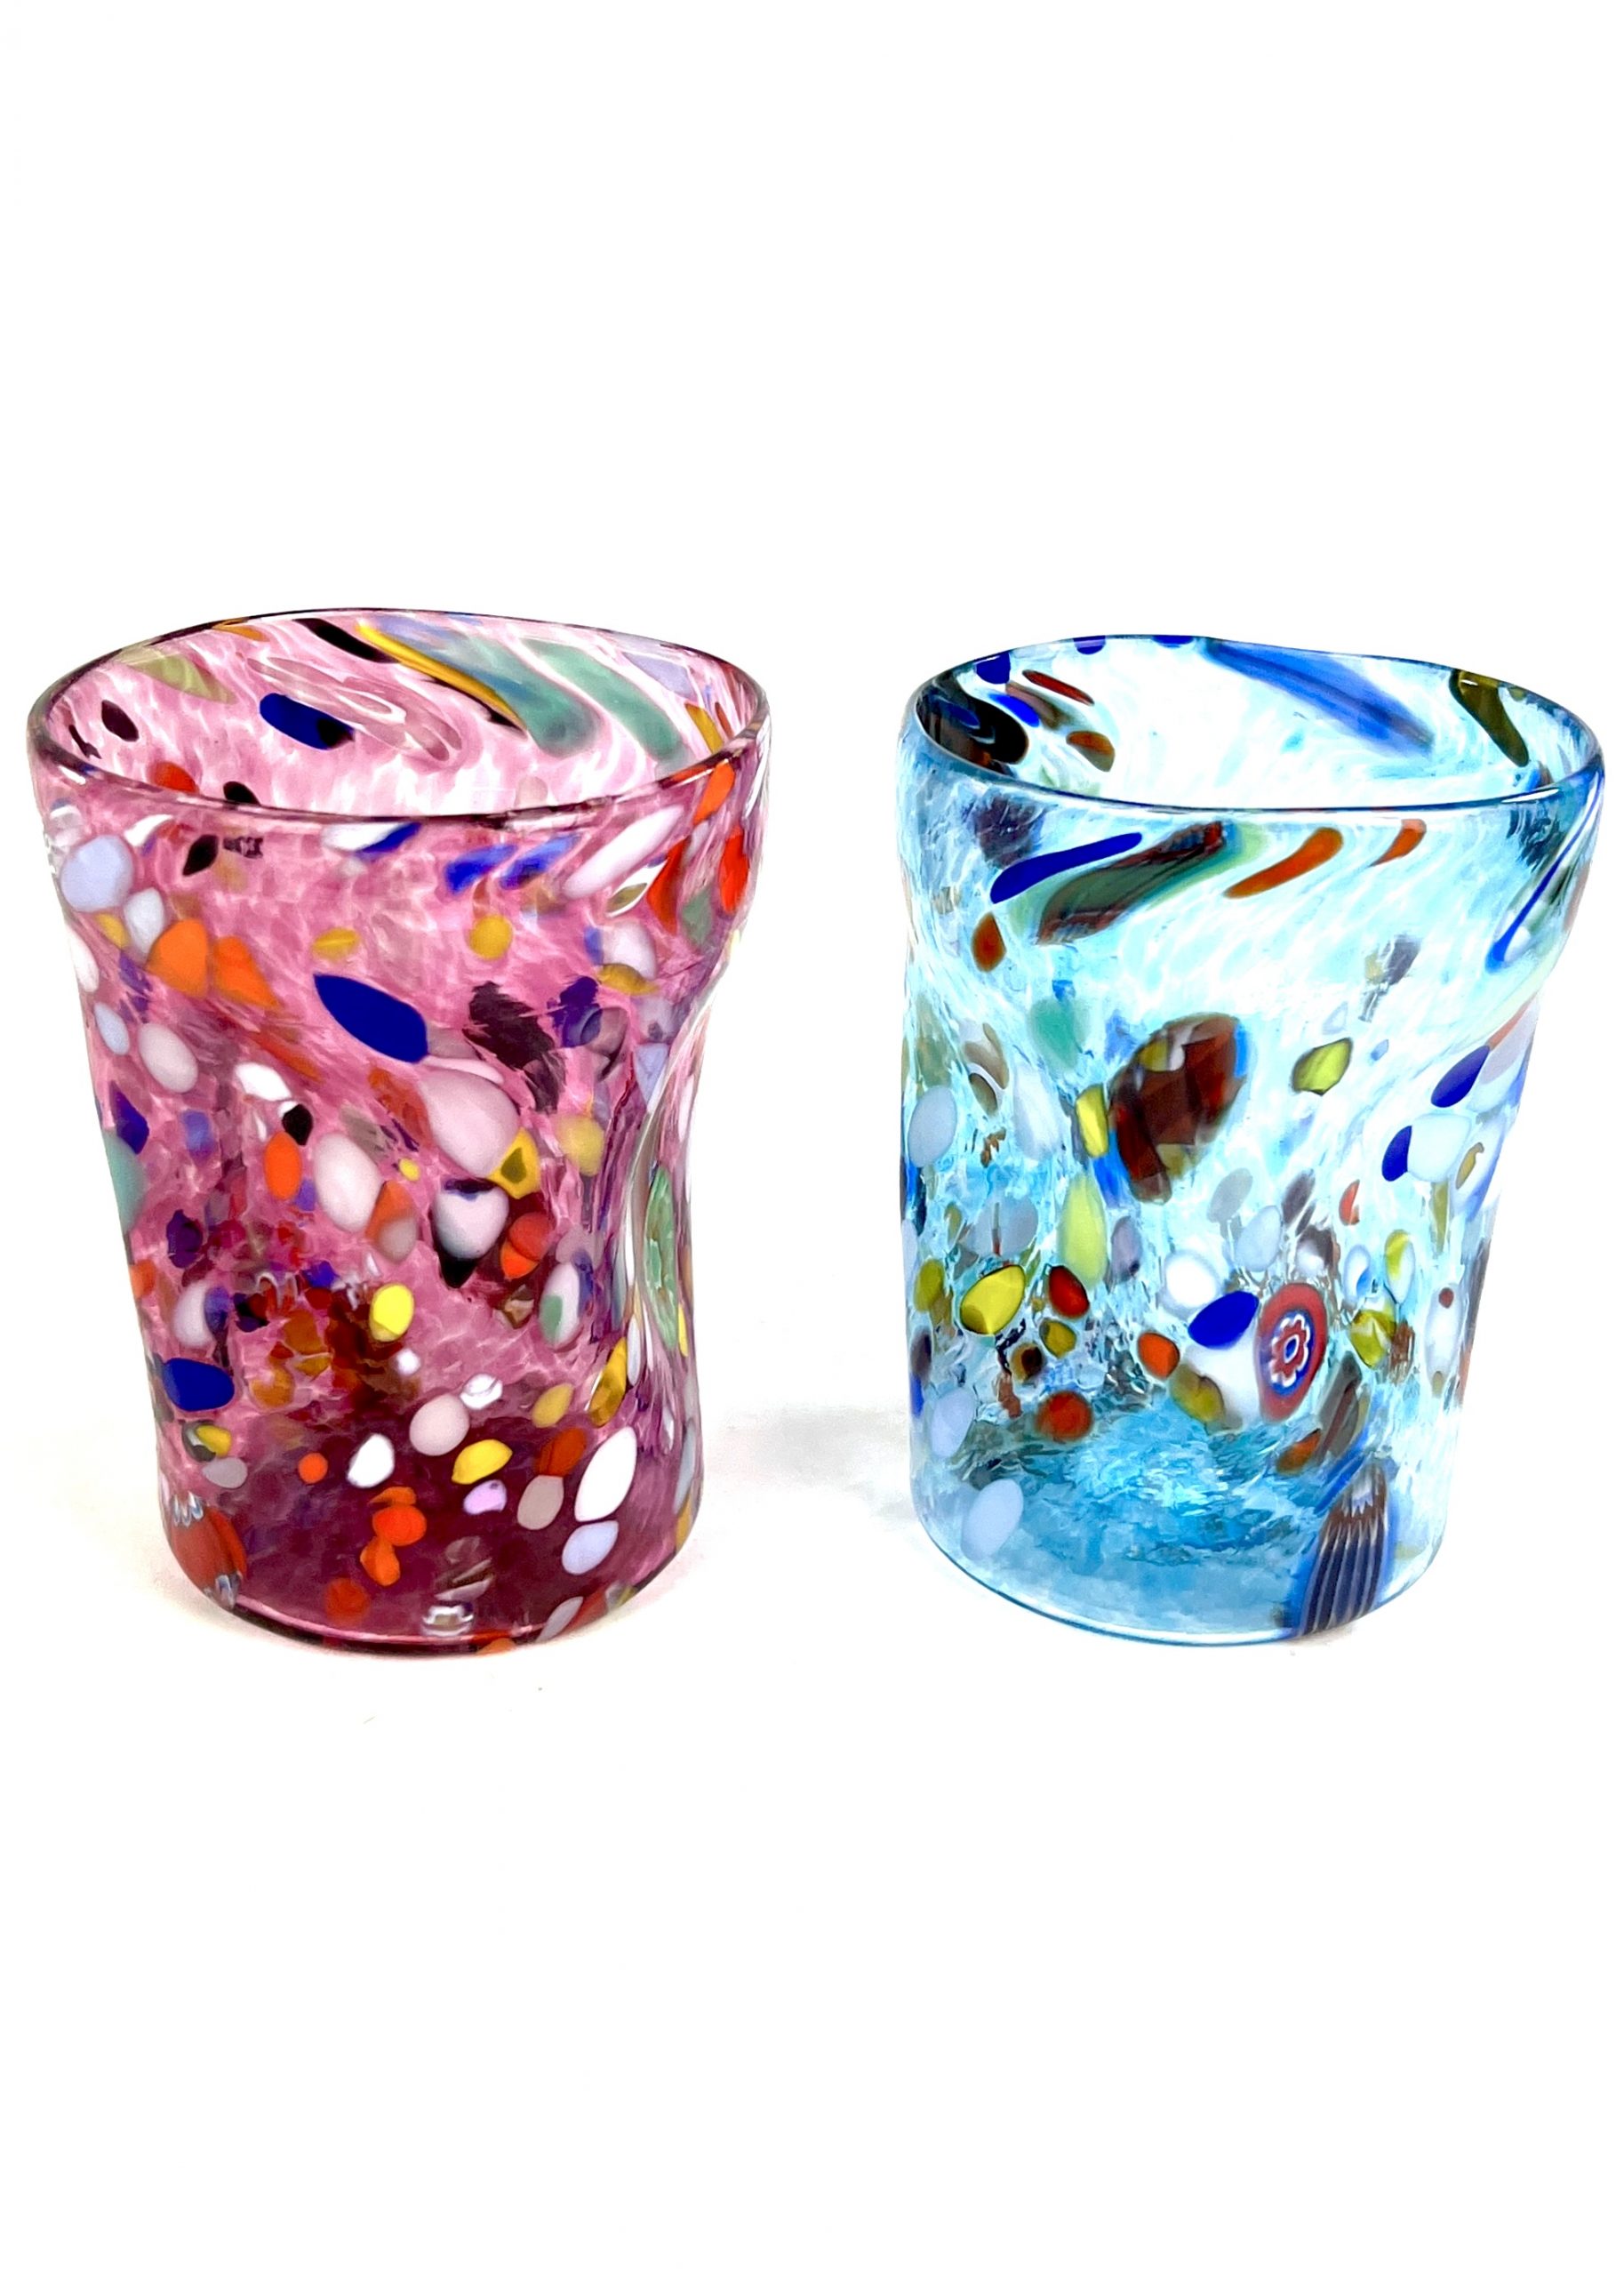 Franco Multi-Colored Glass Drinking Glasses, Set of 6, Made in Murano